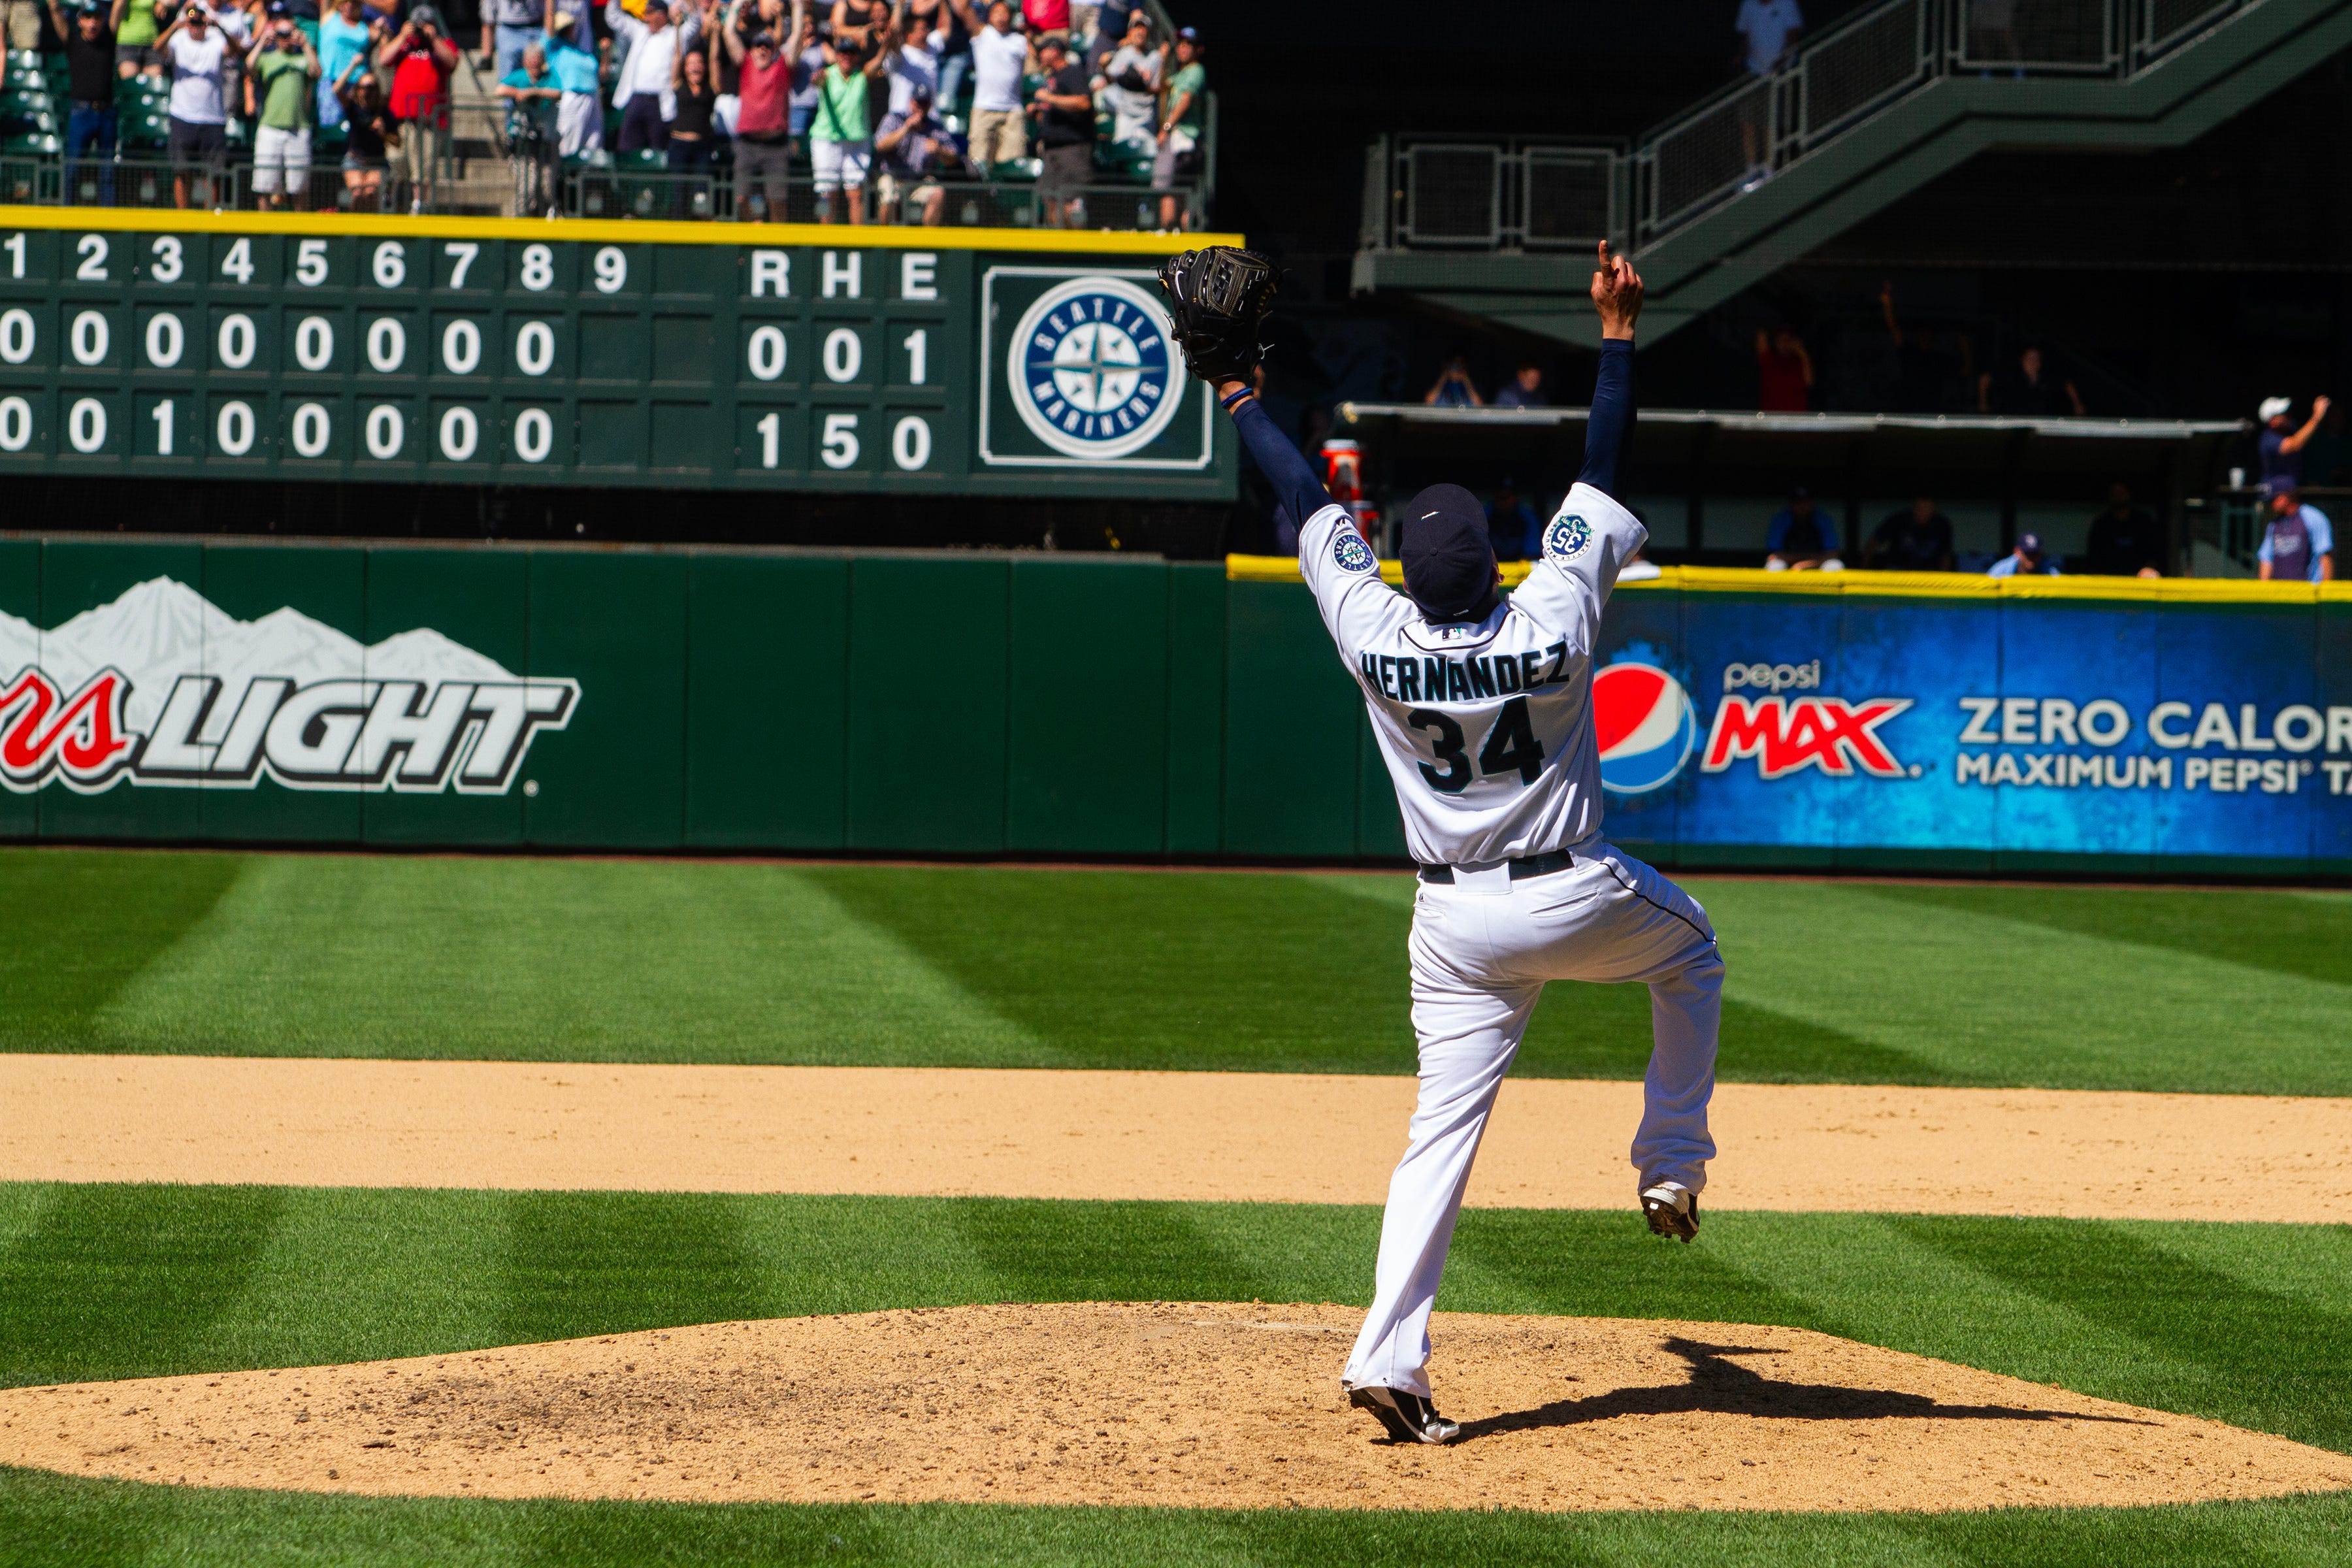 Capturing the Career of Félix Hernández, by Mariners PR